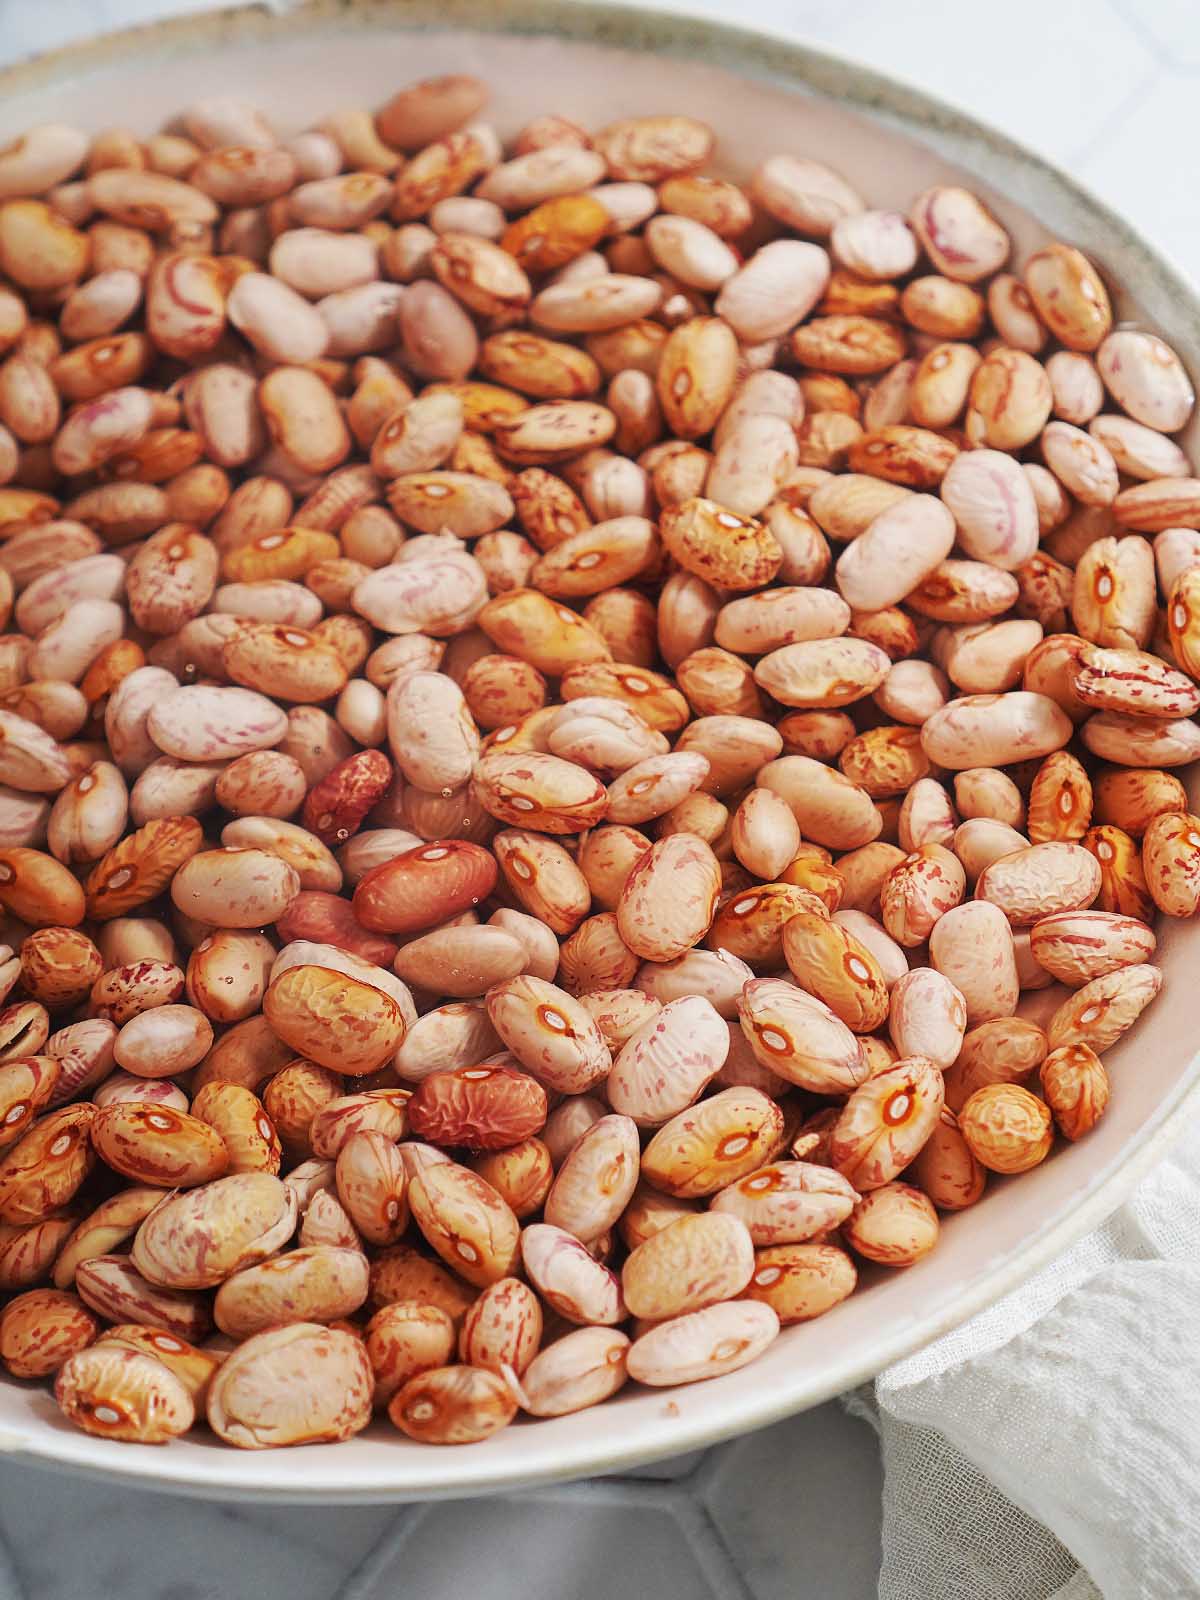 Soaked beans in a large bowl with water.